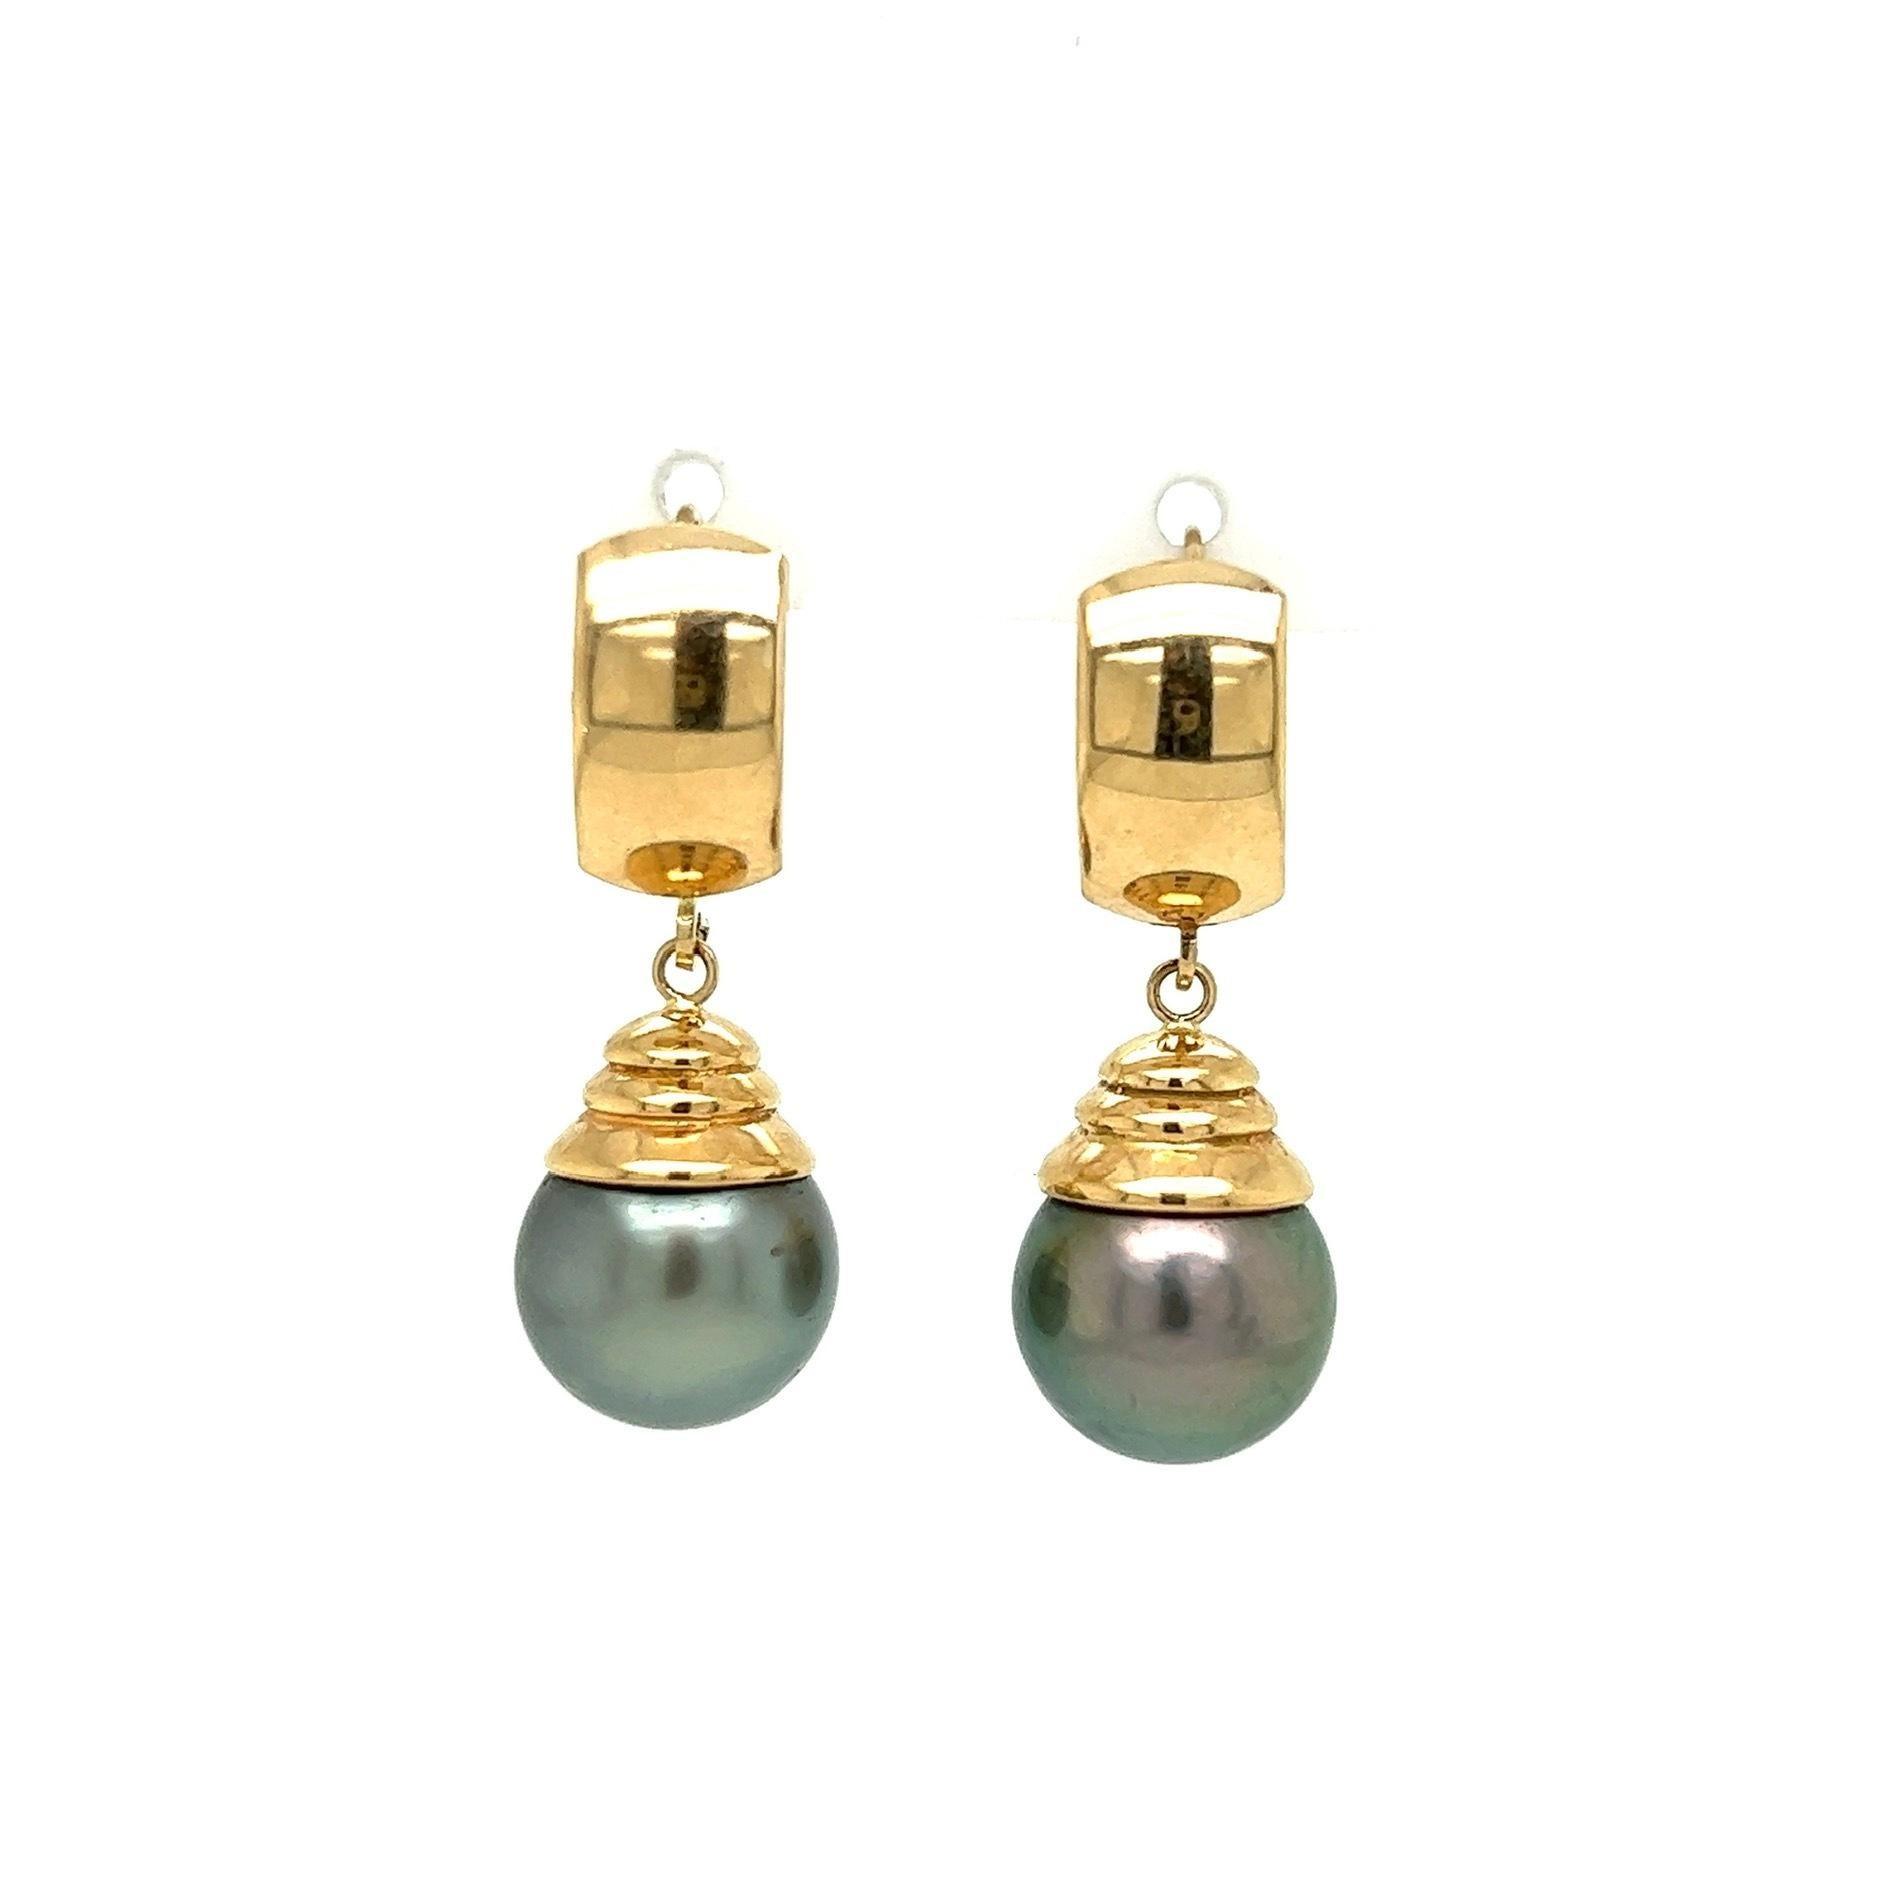 Simply Beautiful! Finely detailed Gold Drop Earrings. Each earring Hand set with a 11.3mm Tahitian Gray South Sea Pearl. Hand crafted 14K Yellow Gold mounting. Approx.  Dimensions: 1.25” l x 0.44” w. More Beautiful in real time! A piece you’ll turn